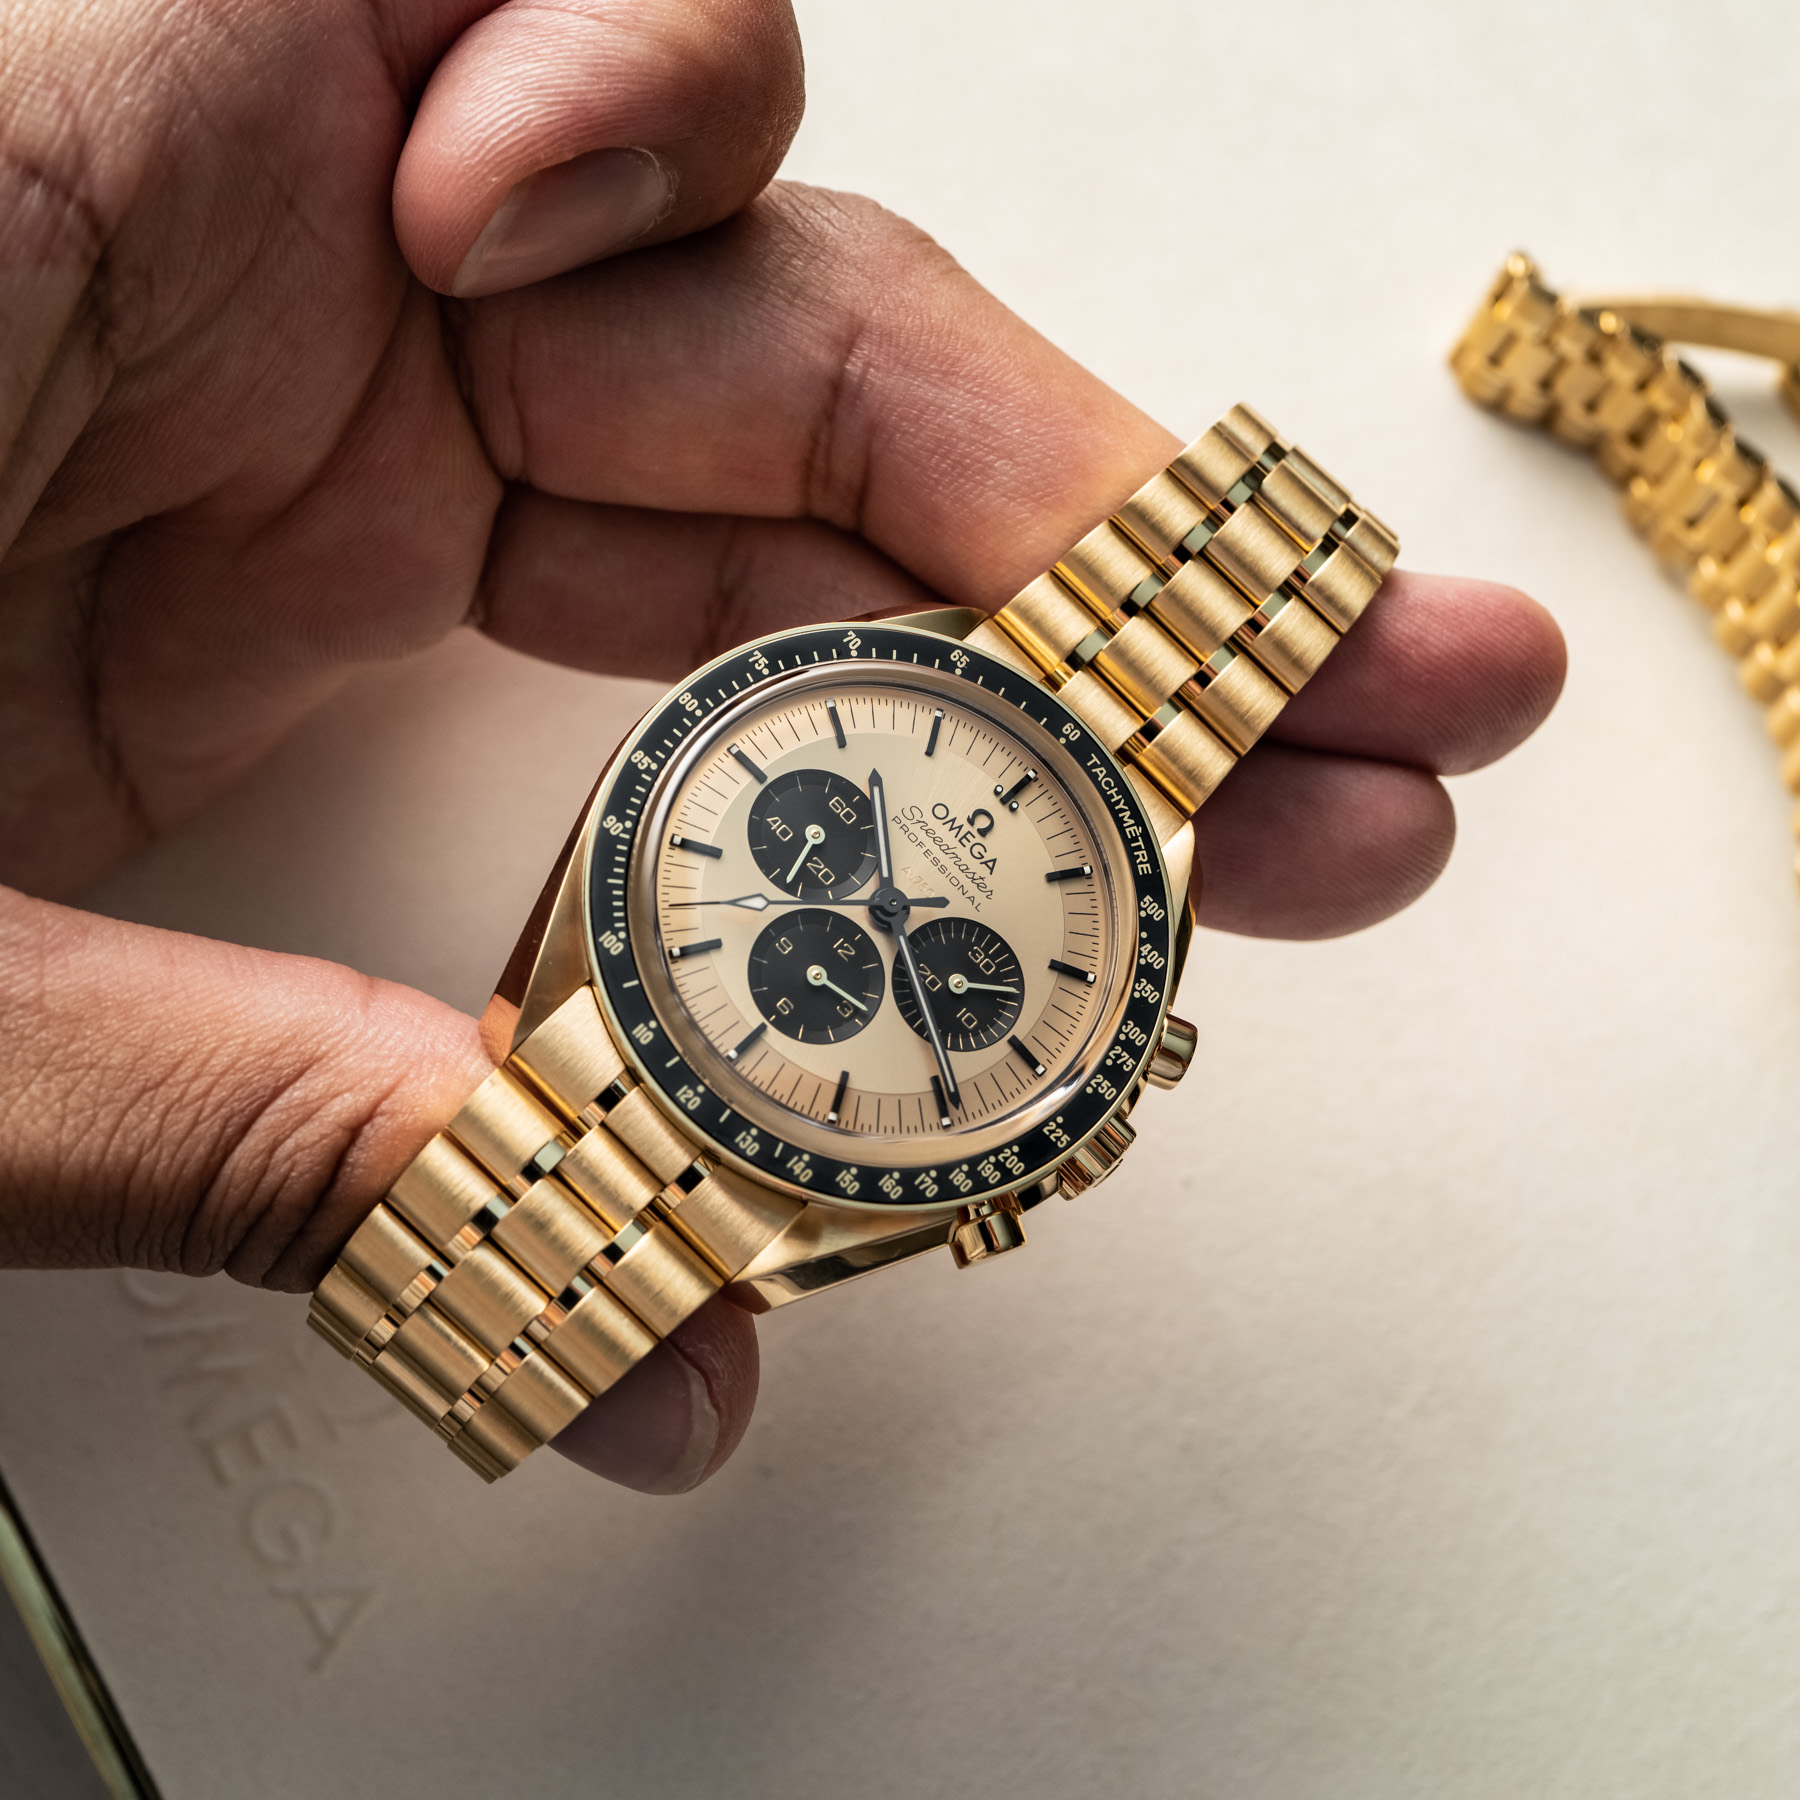 Everyone Needs An Omega Speedmaster - Your Next Watch Review